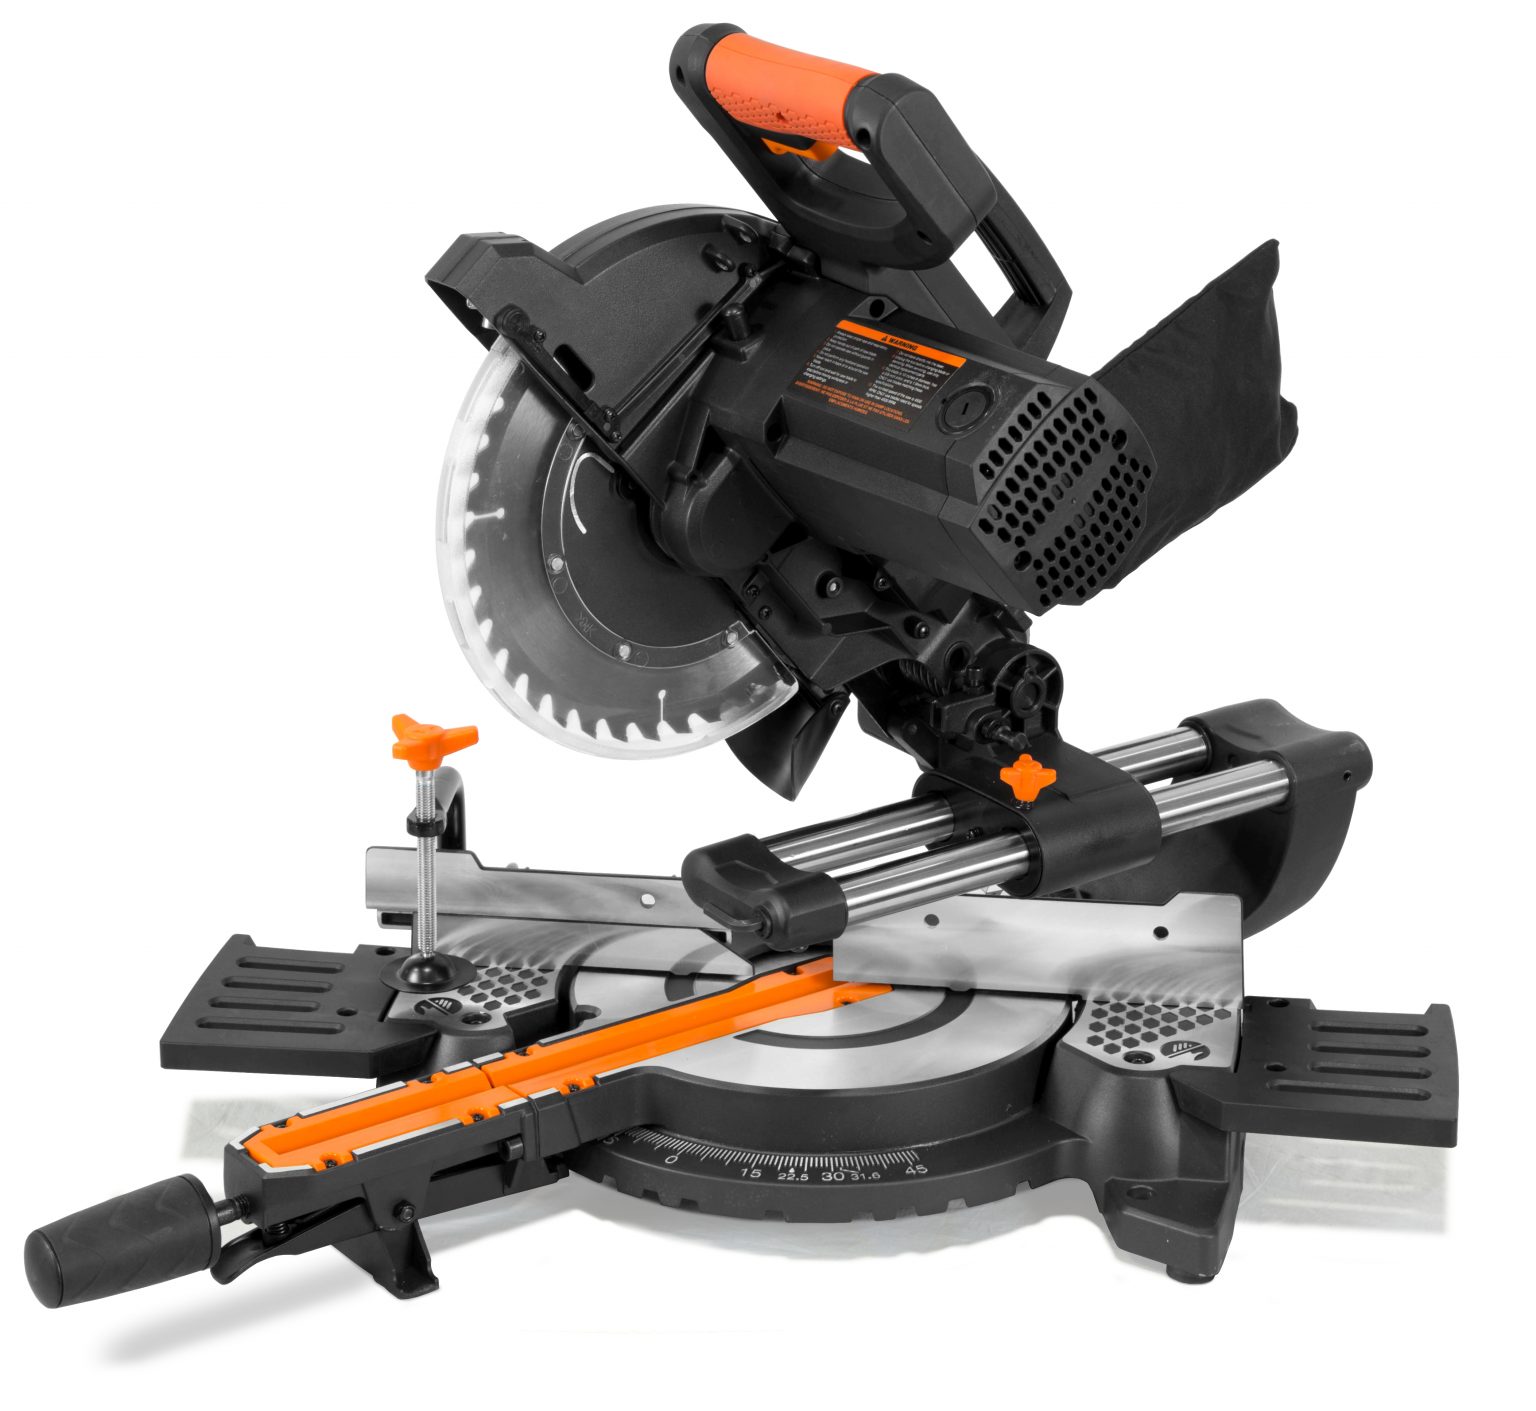 WEN 15-Amp 10-Inch Single Bevel Compact Sliding Compound Miter Saw with